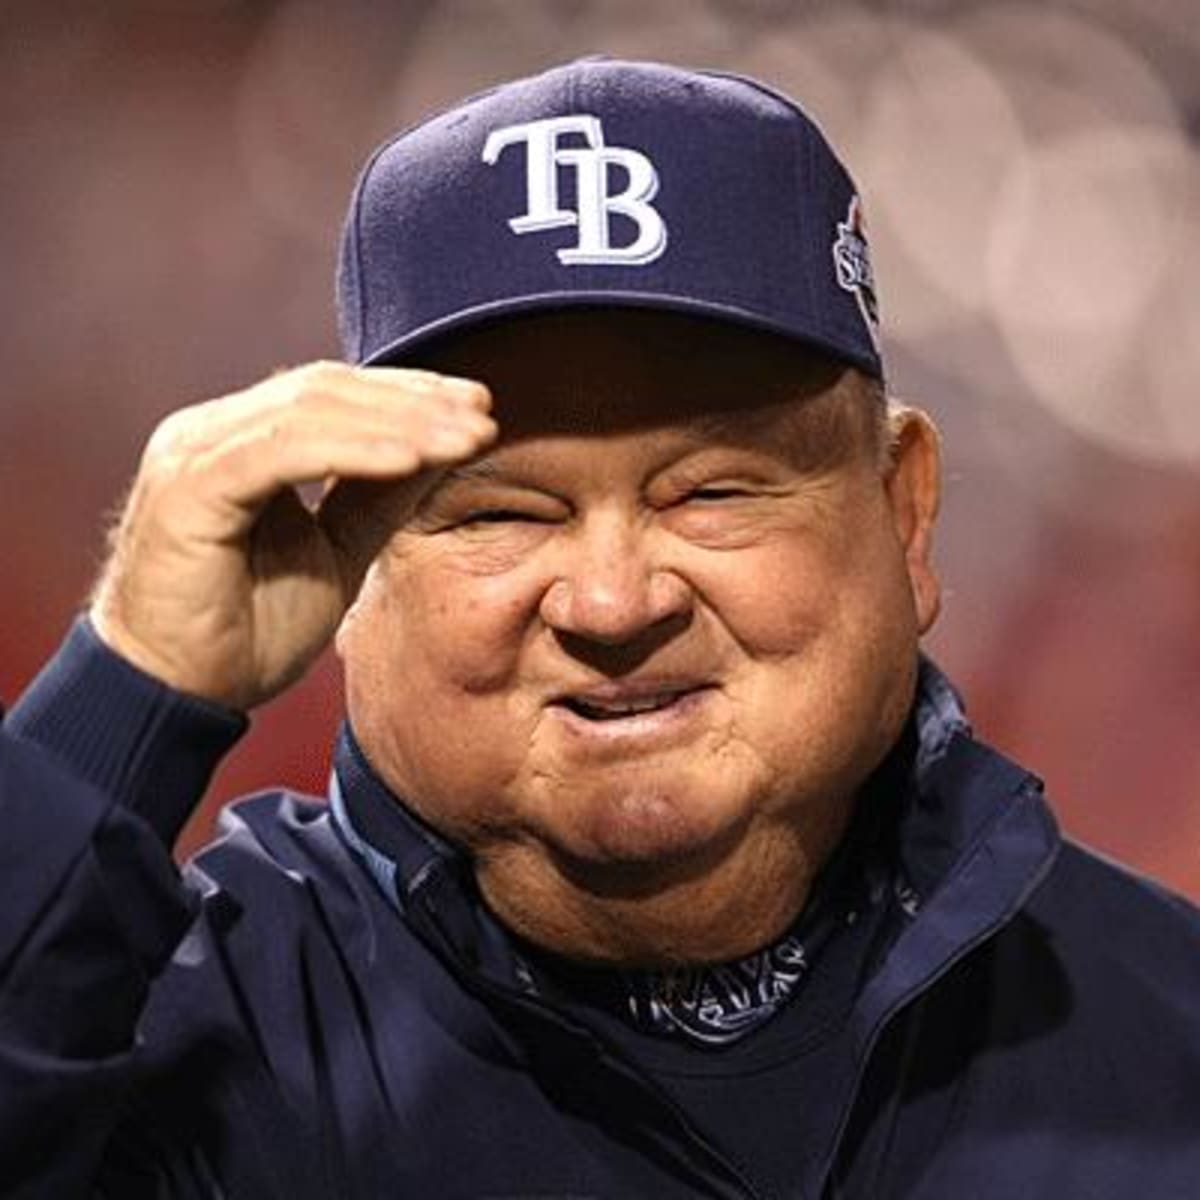 Don Zimmer, who spent 66 years in professional baseball, dies at 83 -  Sports Illustrated